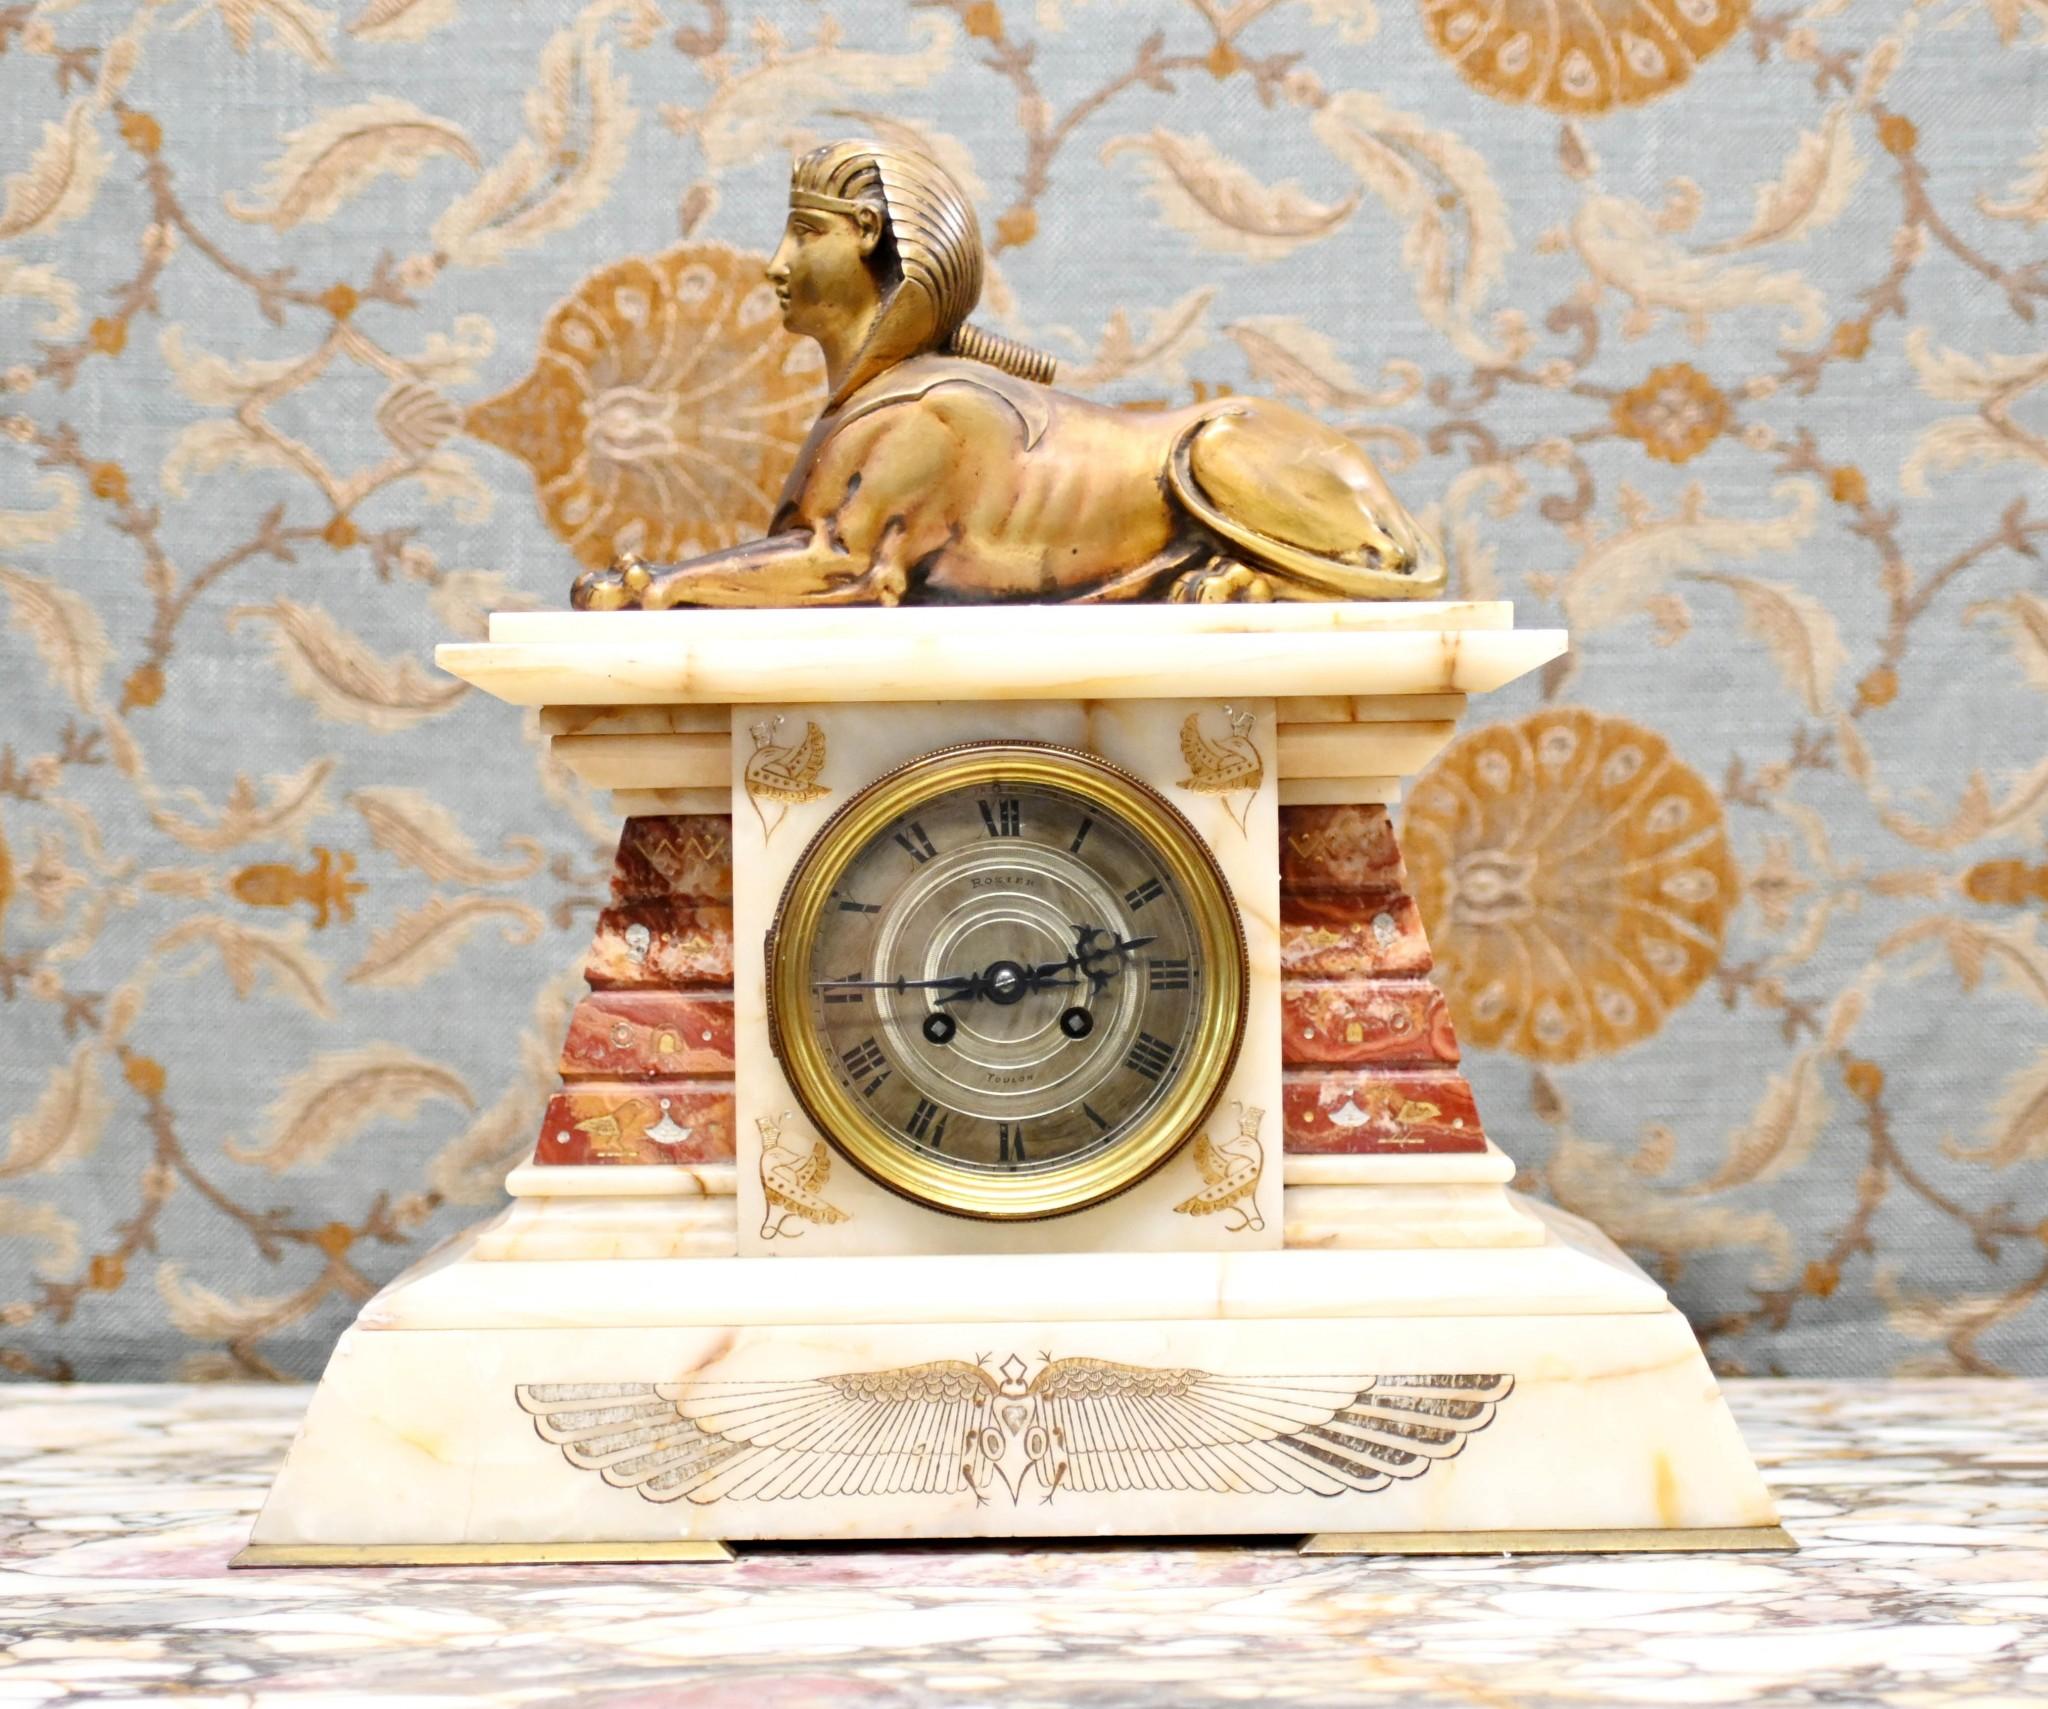 Gorgeous French Empire mantel clock in marble and gilt
Piece is surmounted - very high Empire - by the gilded sphinx
Classic Egyptian style with specicmen marble supports and Egyptian motifs
Clock face is inscribed with 'Rozier' and 'Toulon'
Working